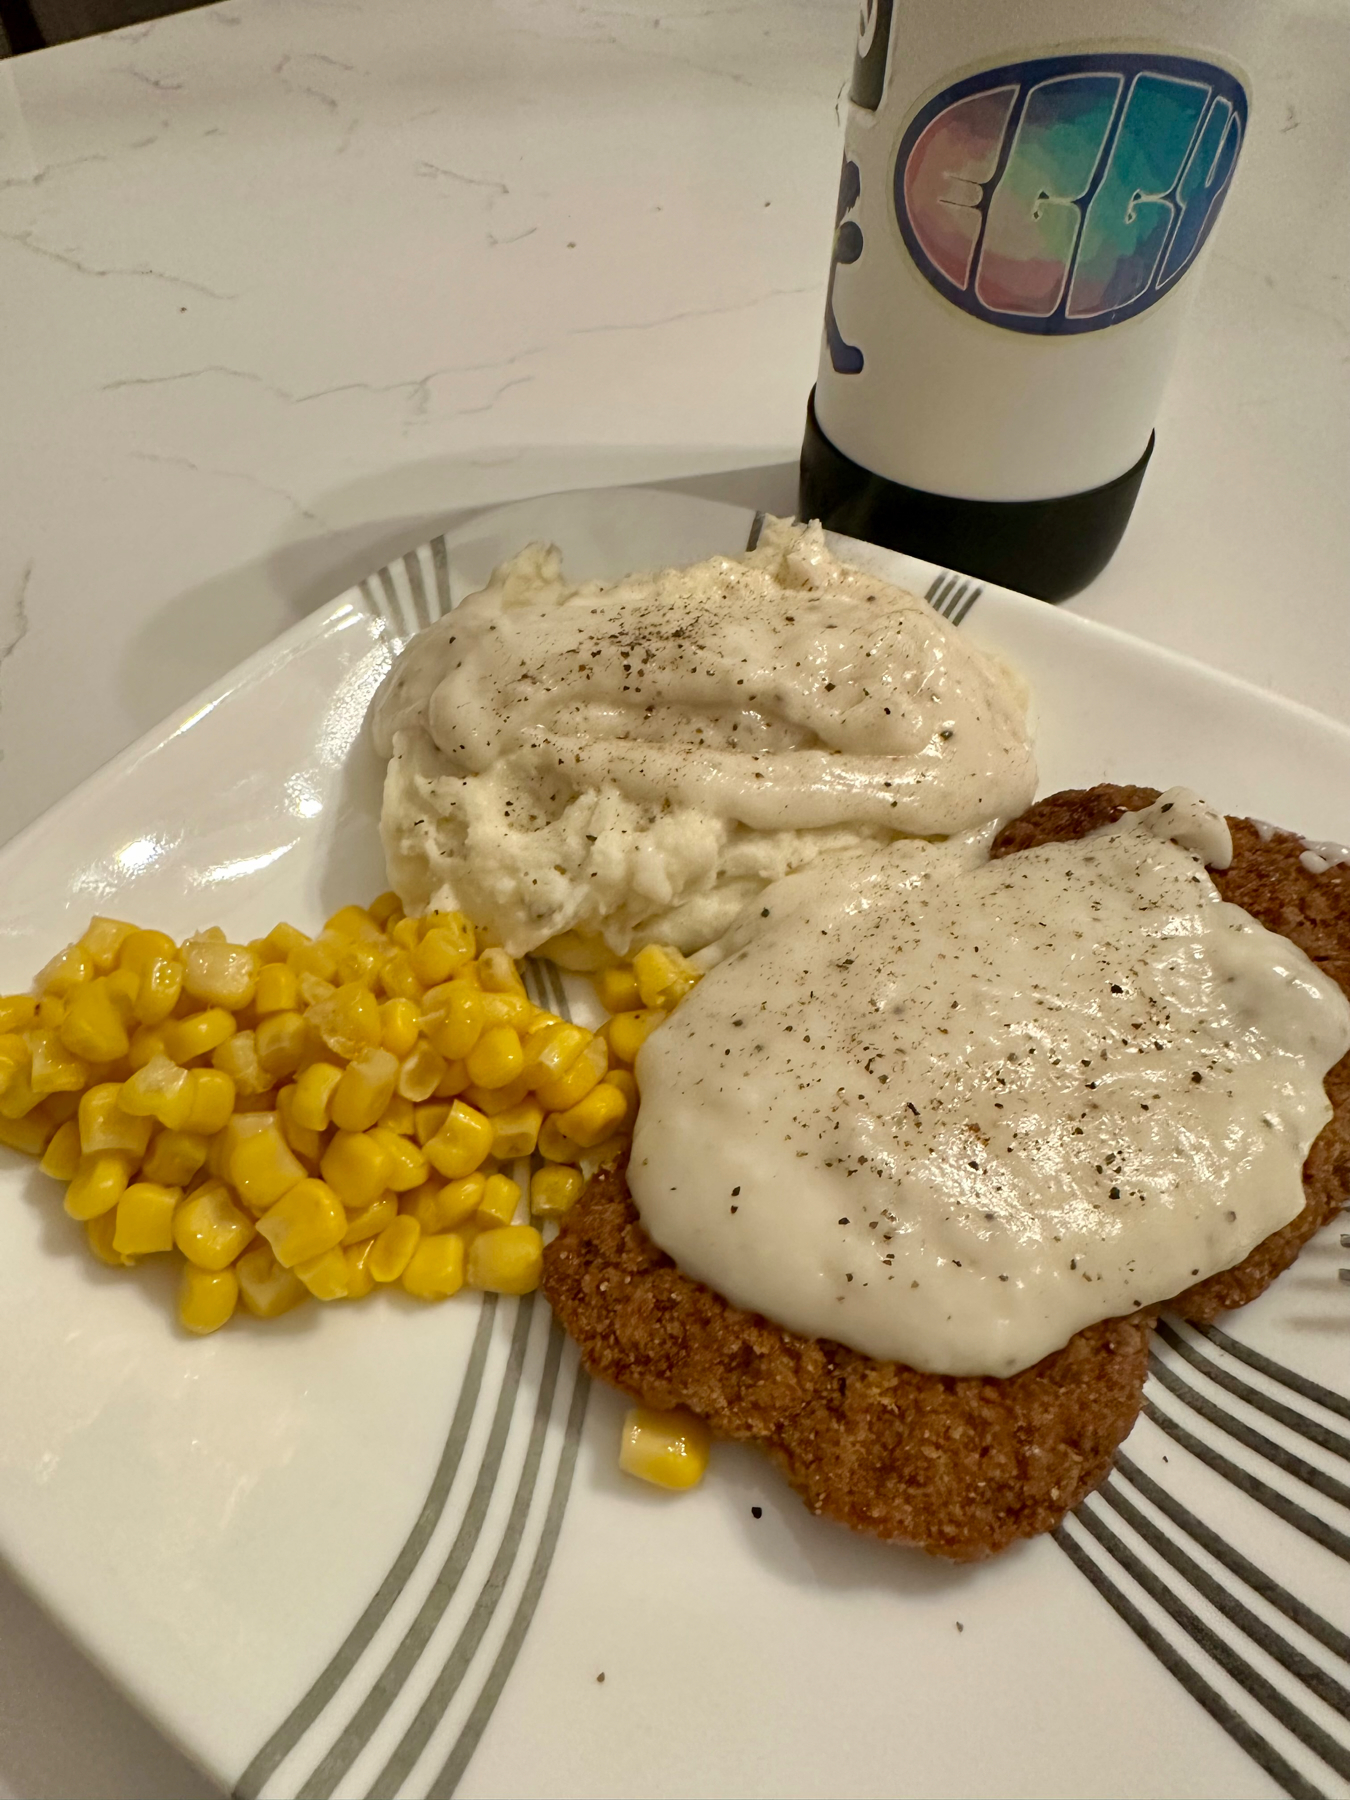 A plate with chicken-fried steak topped with cream gravy, mashed potatoes also with gravy, and a side of corn kernels. In the background, a bottle with a colorful logo.